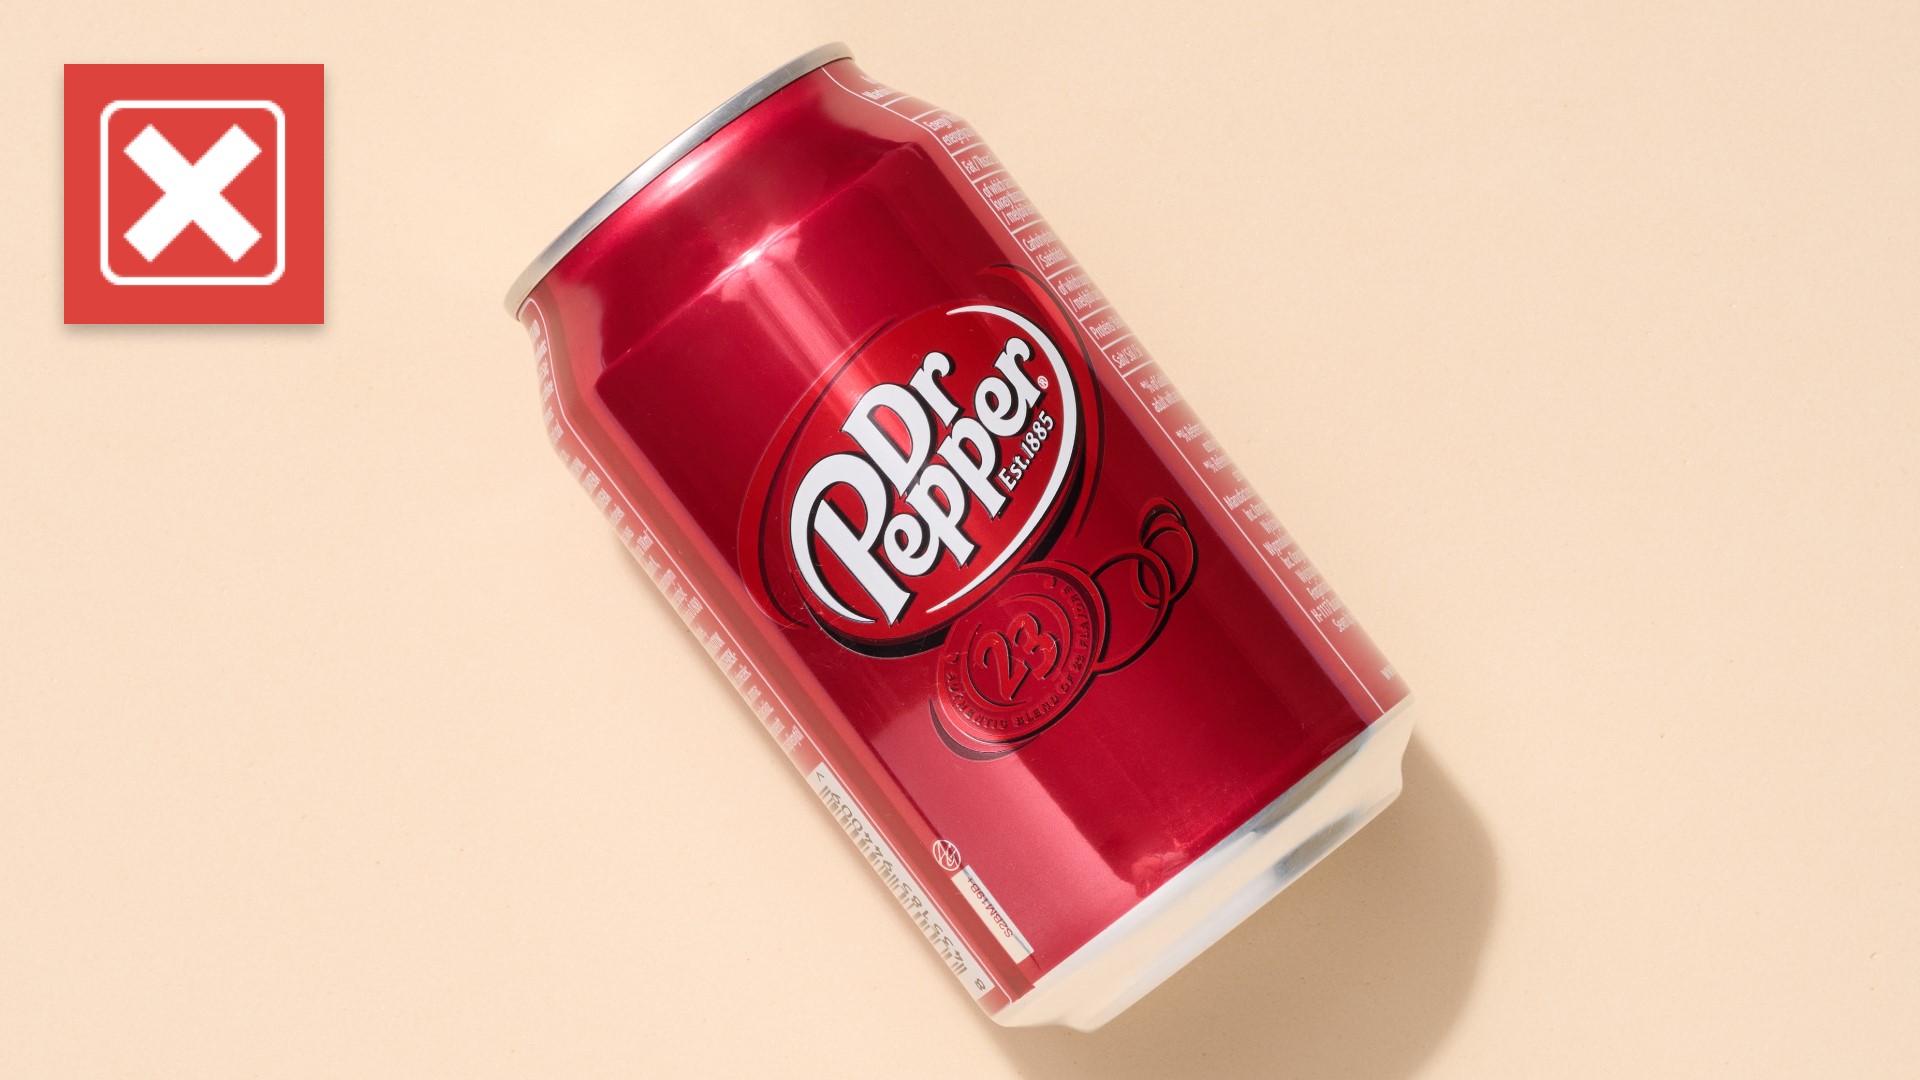 Dr Pepper not being discontinued